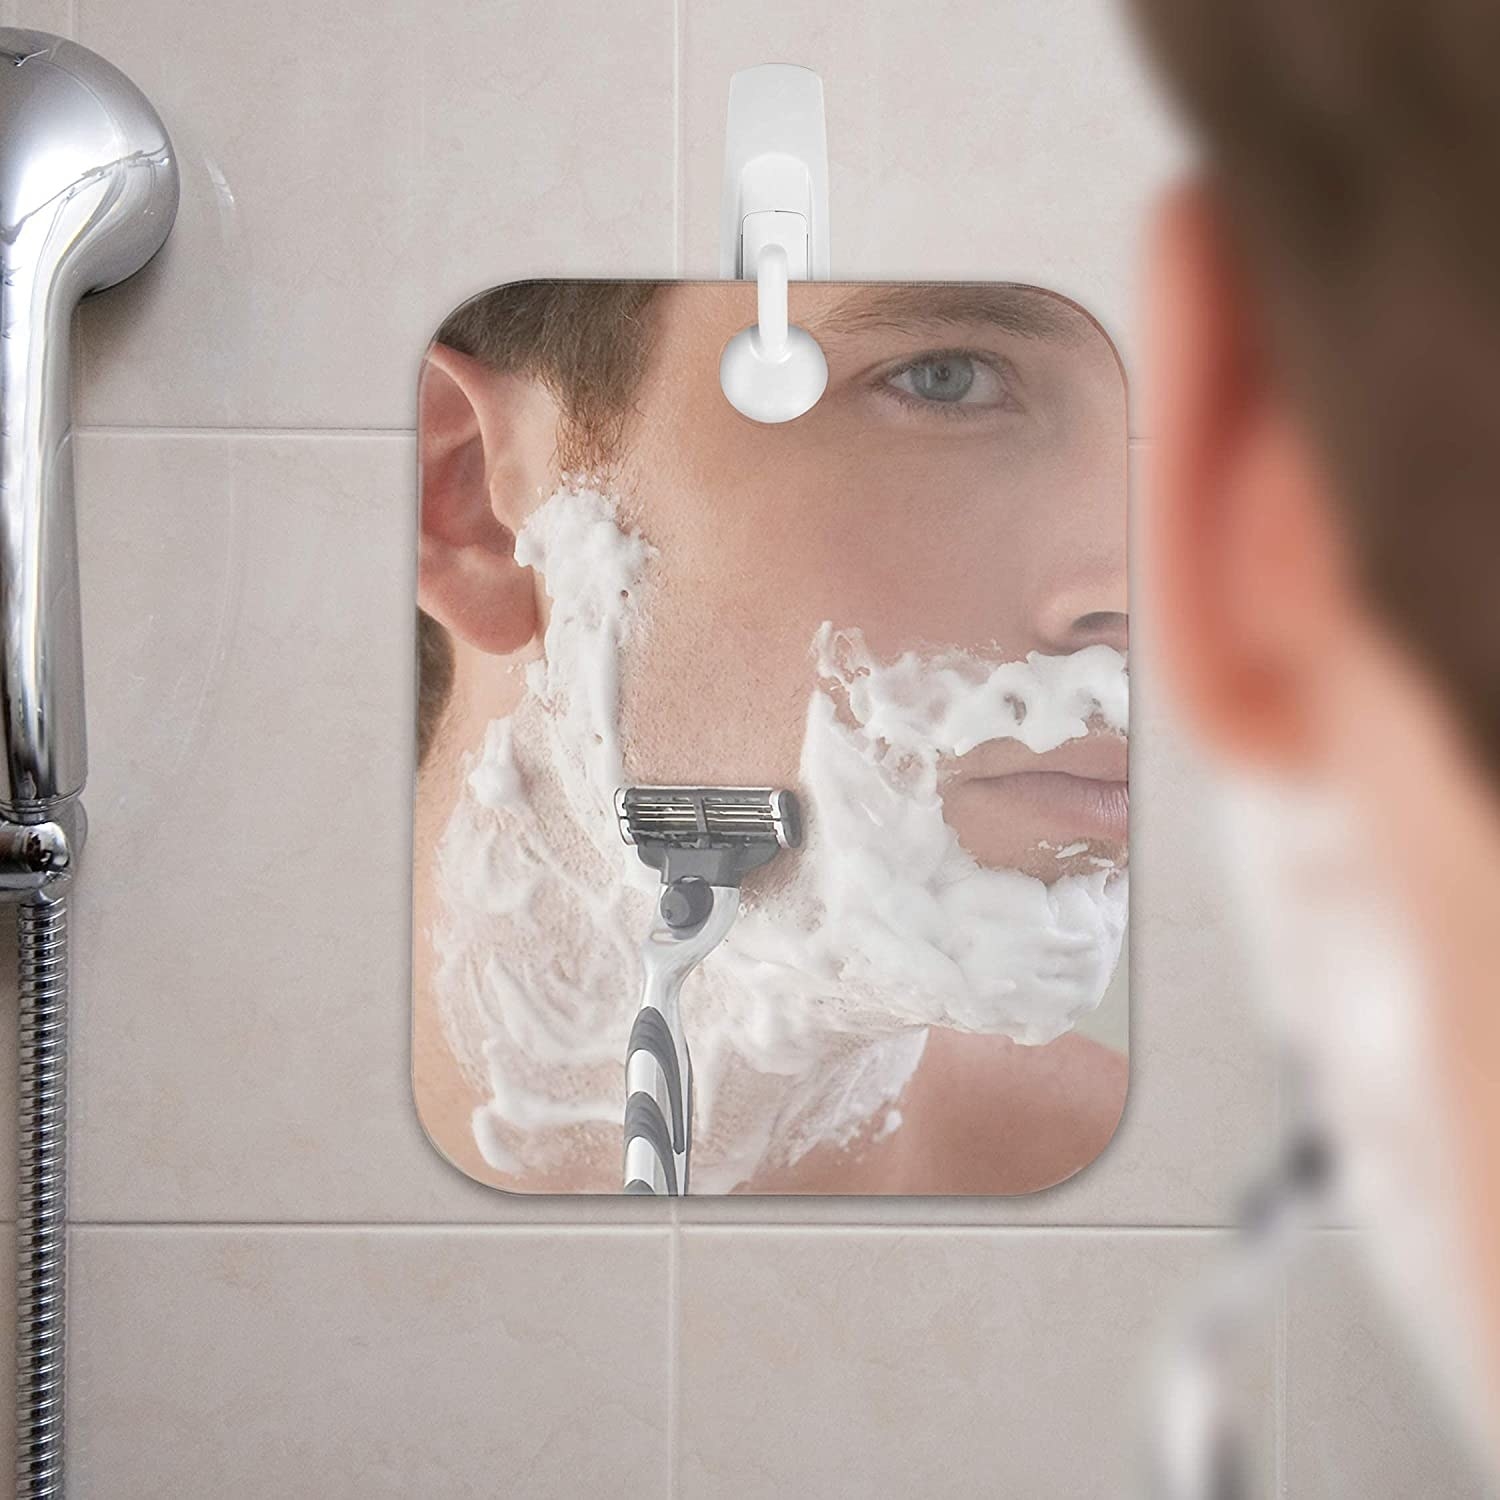 A person uses the mirror to shave their face while in the shower